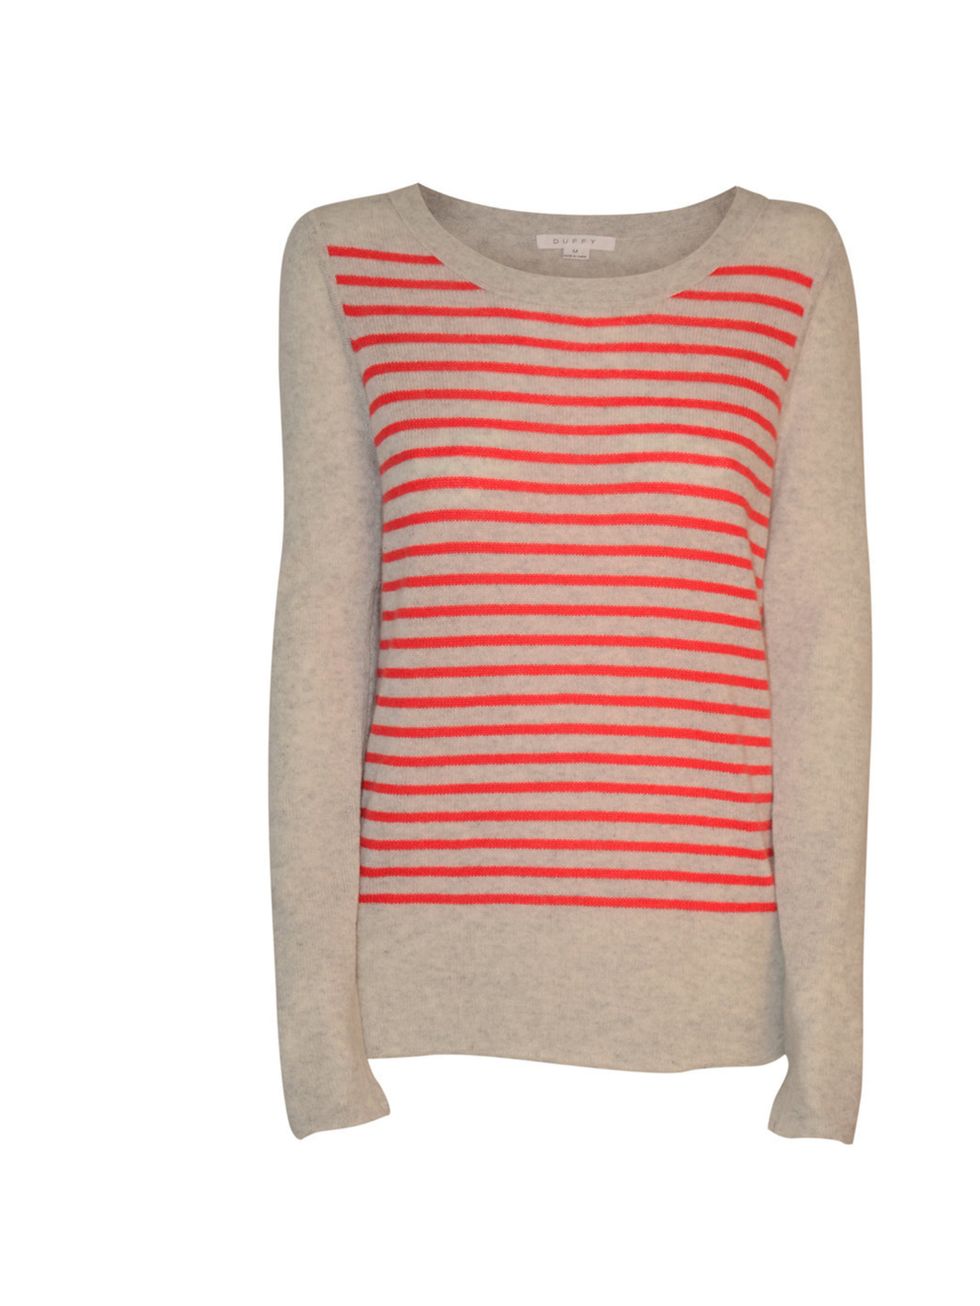 <p>Duffy Cashmere sweater, £170 at Csee Boutique</p><p><a href="http://cseeboutique.com/knitwear/duffy-light-mist-cashmere-sweater-with-red-stripes.html">BUY NOW </a></p>